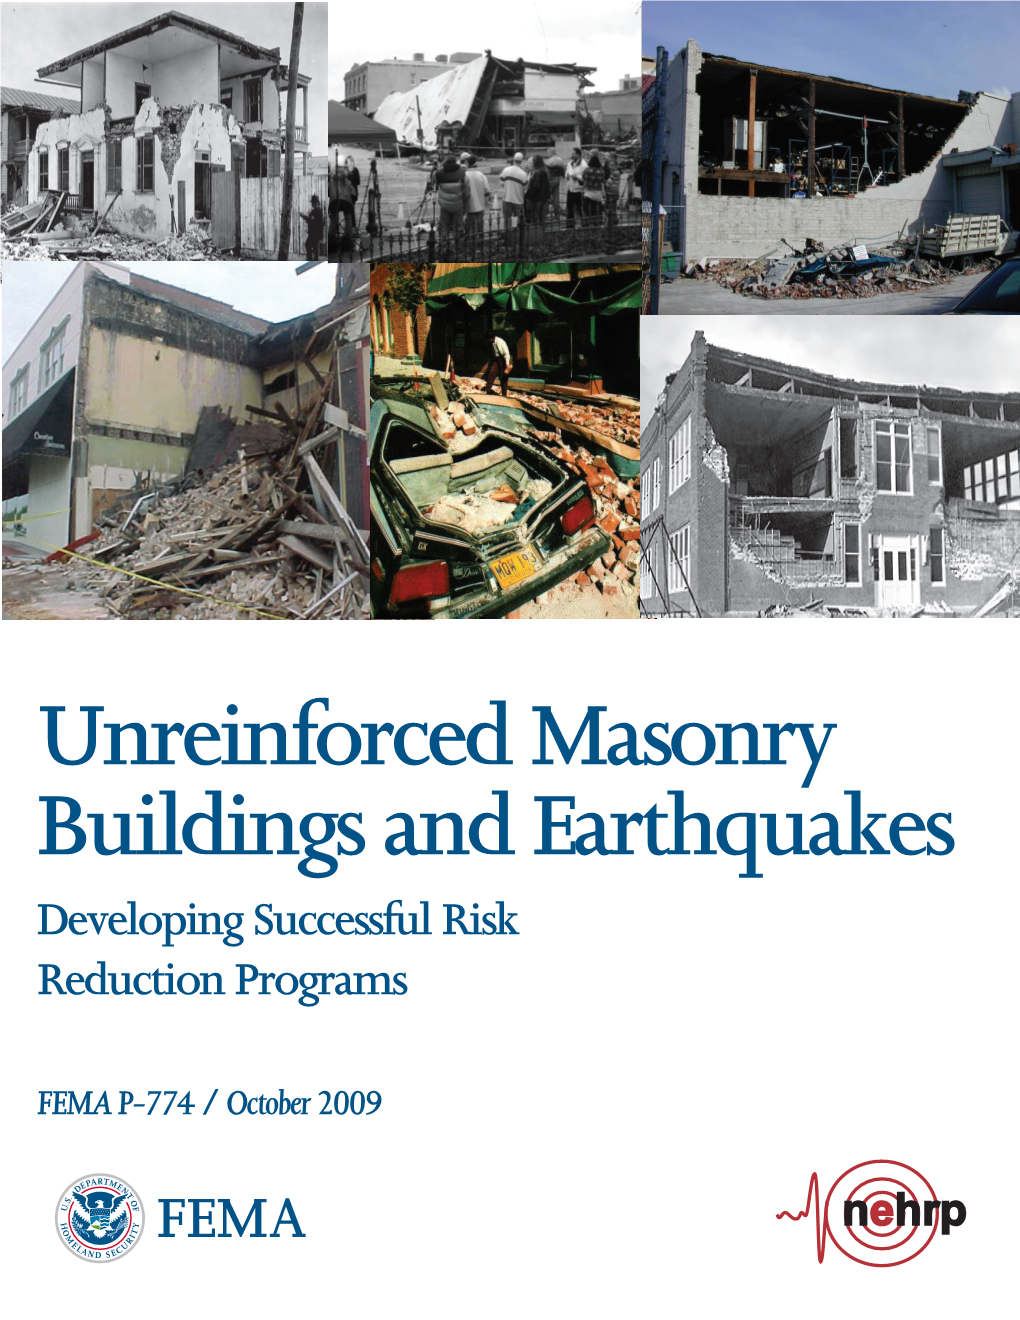 Unreinforced Masonry Buildings and Earthquakes Developing Successful Risk Reduction Programs